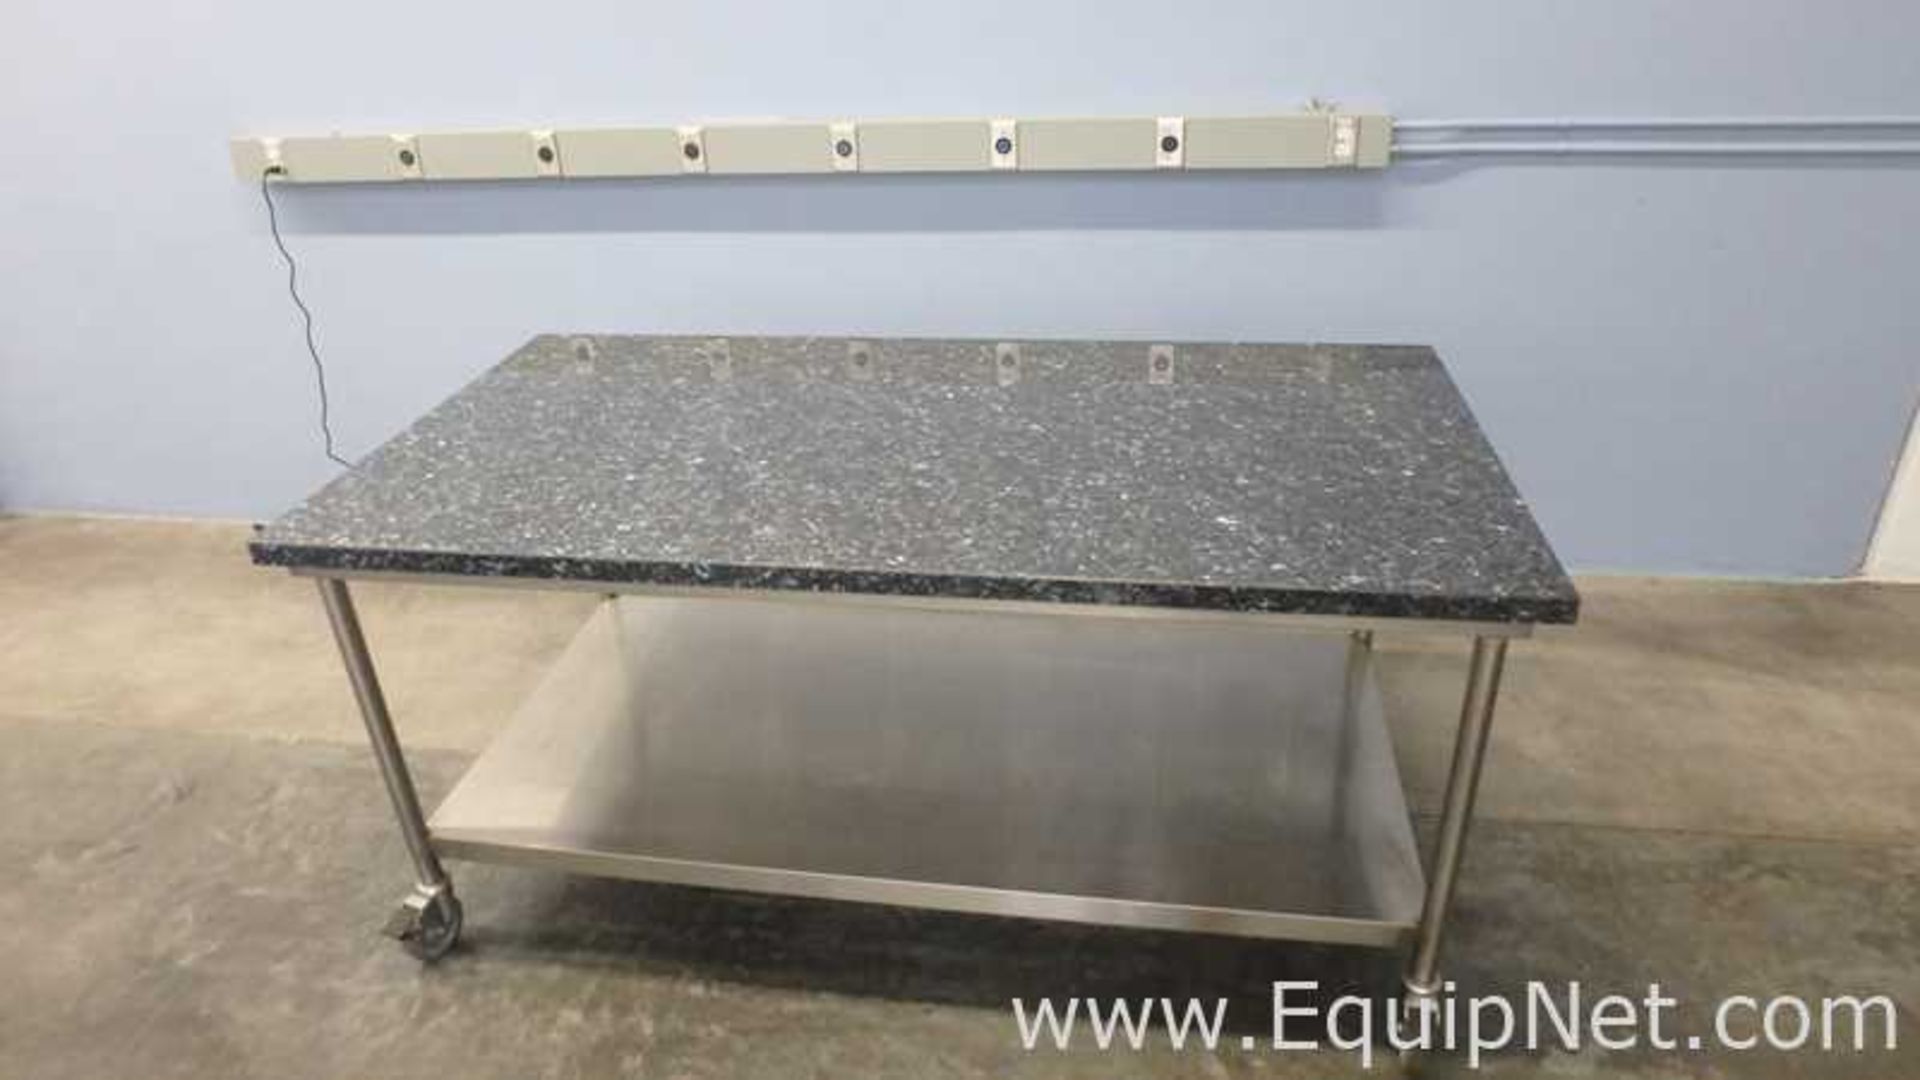 Lot of 3 Granite Top Stainless Steel Work Tables 75in x 39in